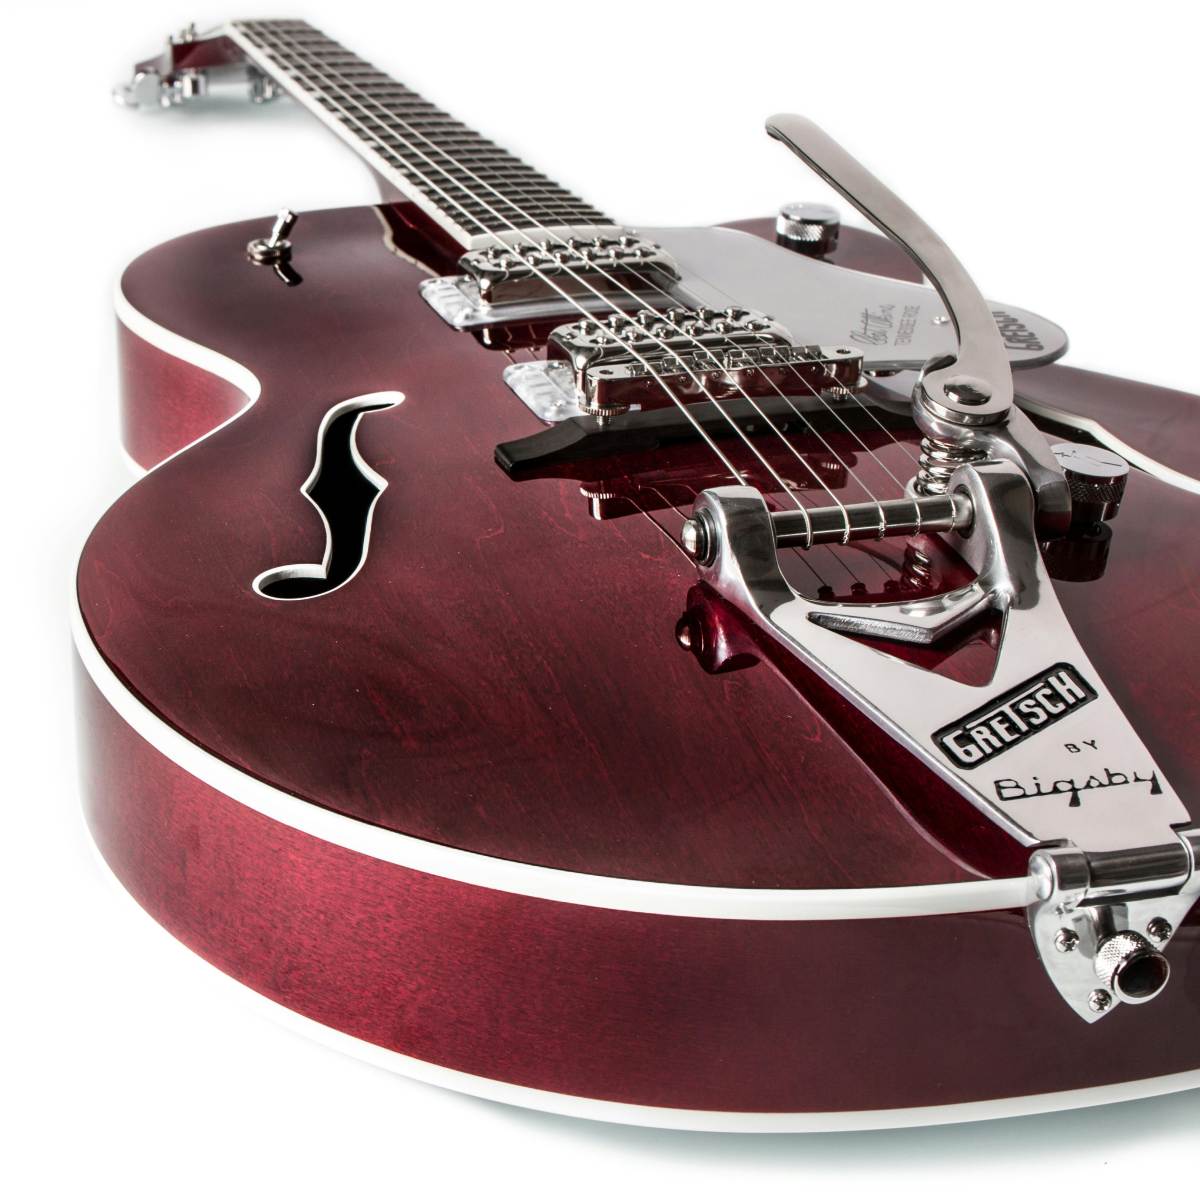 The Red PRS Hollowbody II